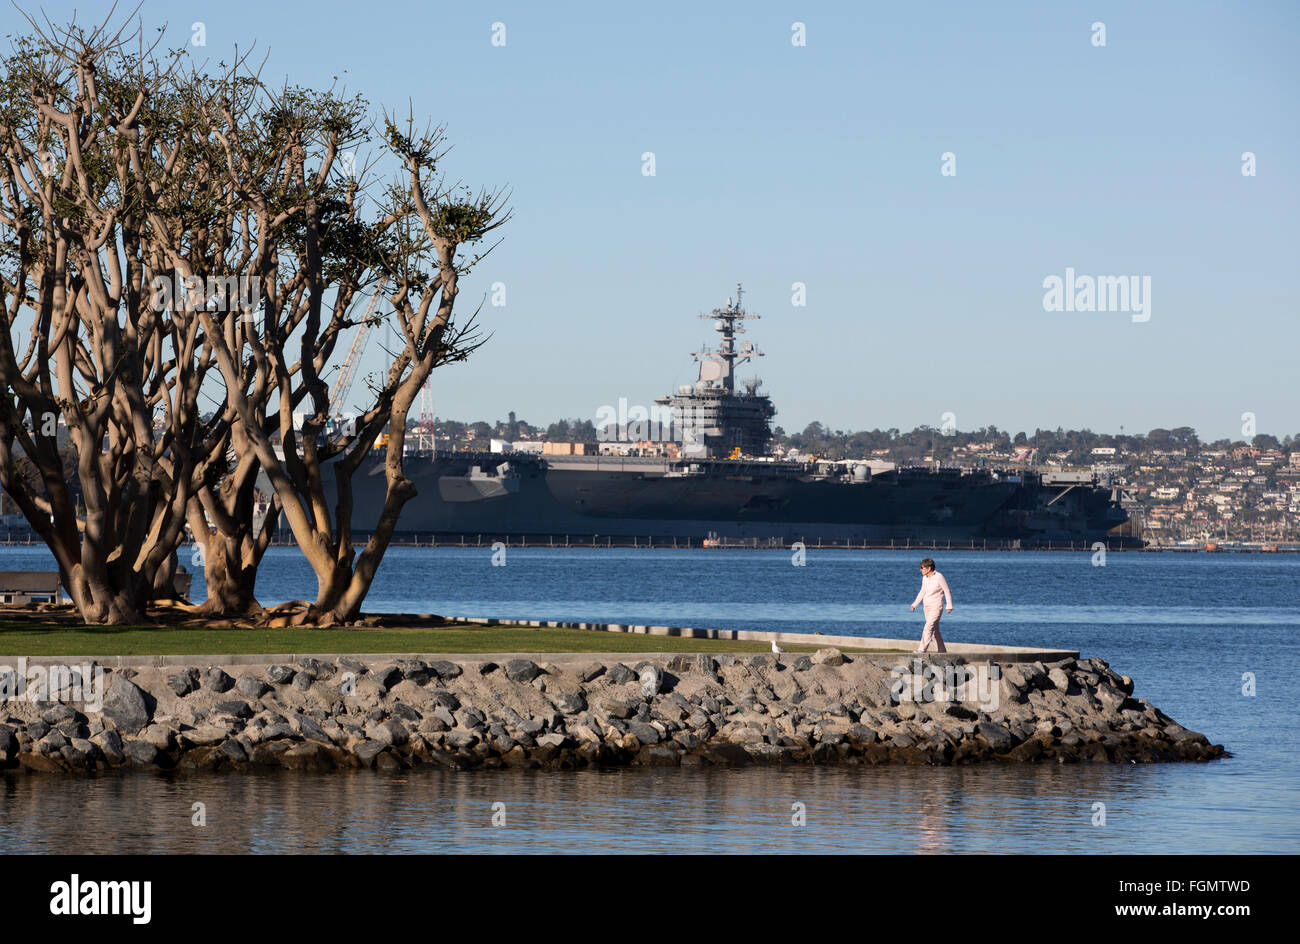 Woman walking in Tuna Harbor Park with USS Carl Vinson in the background, San Diego, California Stock Photo